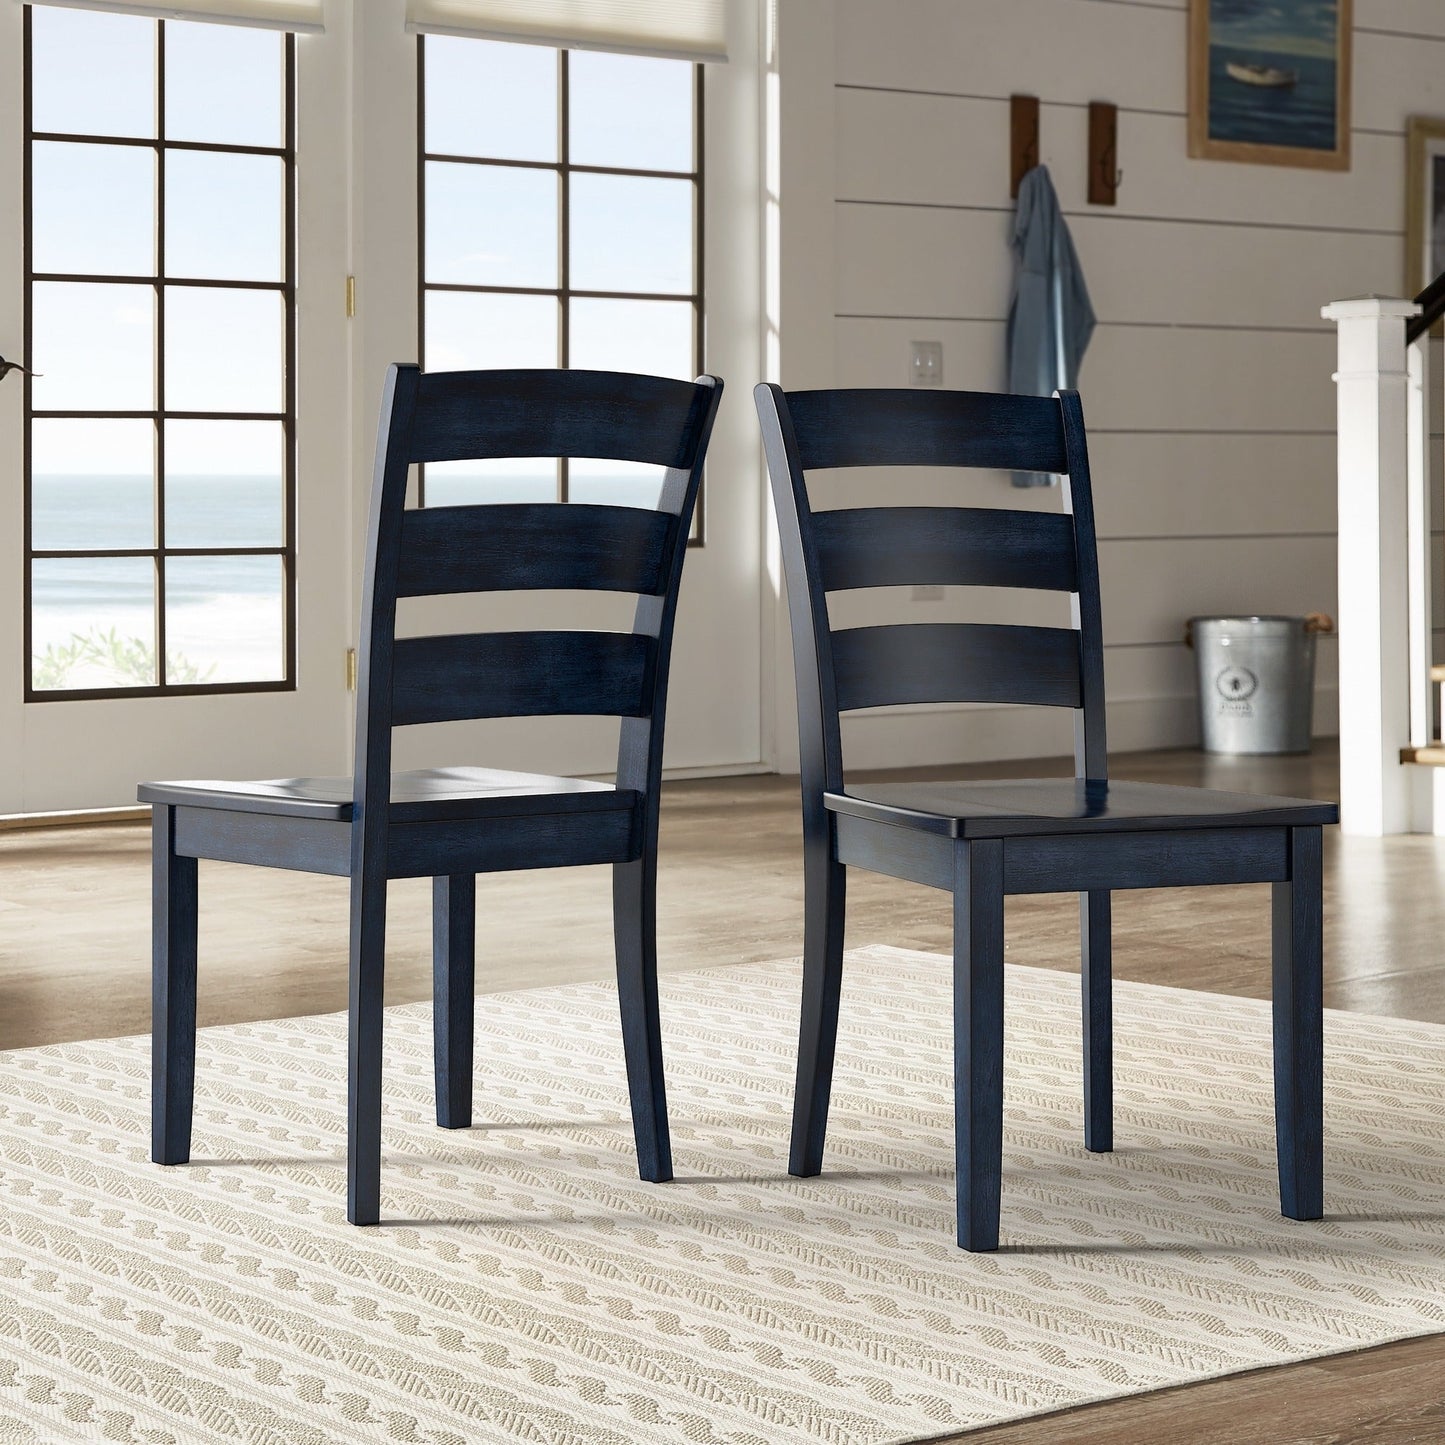 Two-Tone Round 5-Piece Dining Set - Antique Denim Finish, Ladder Back Chairs